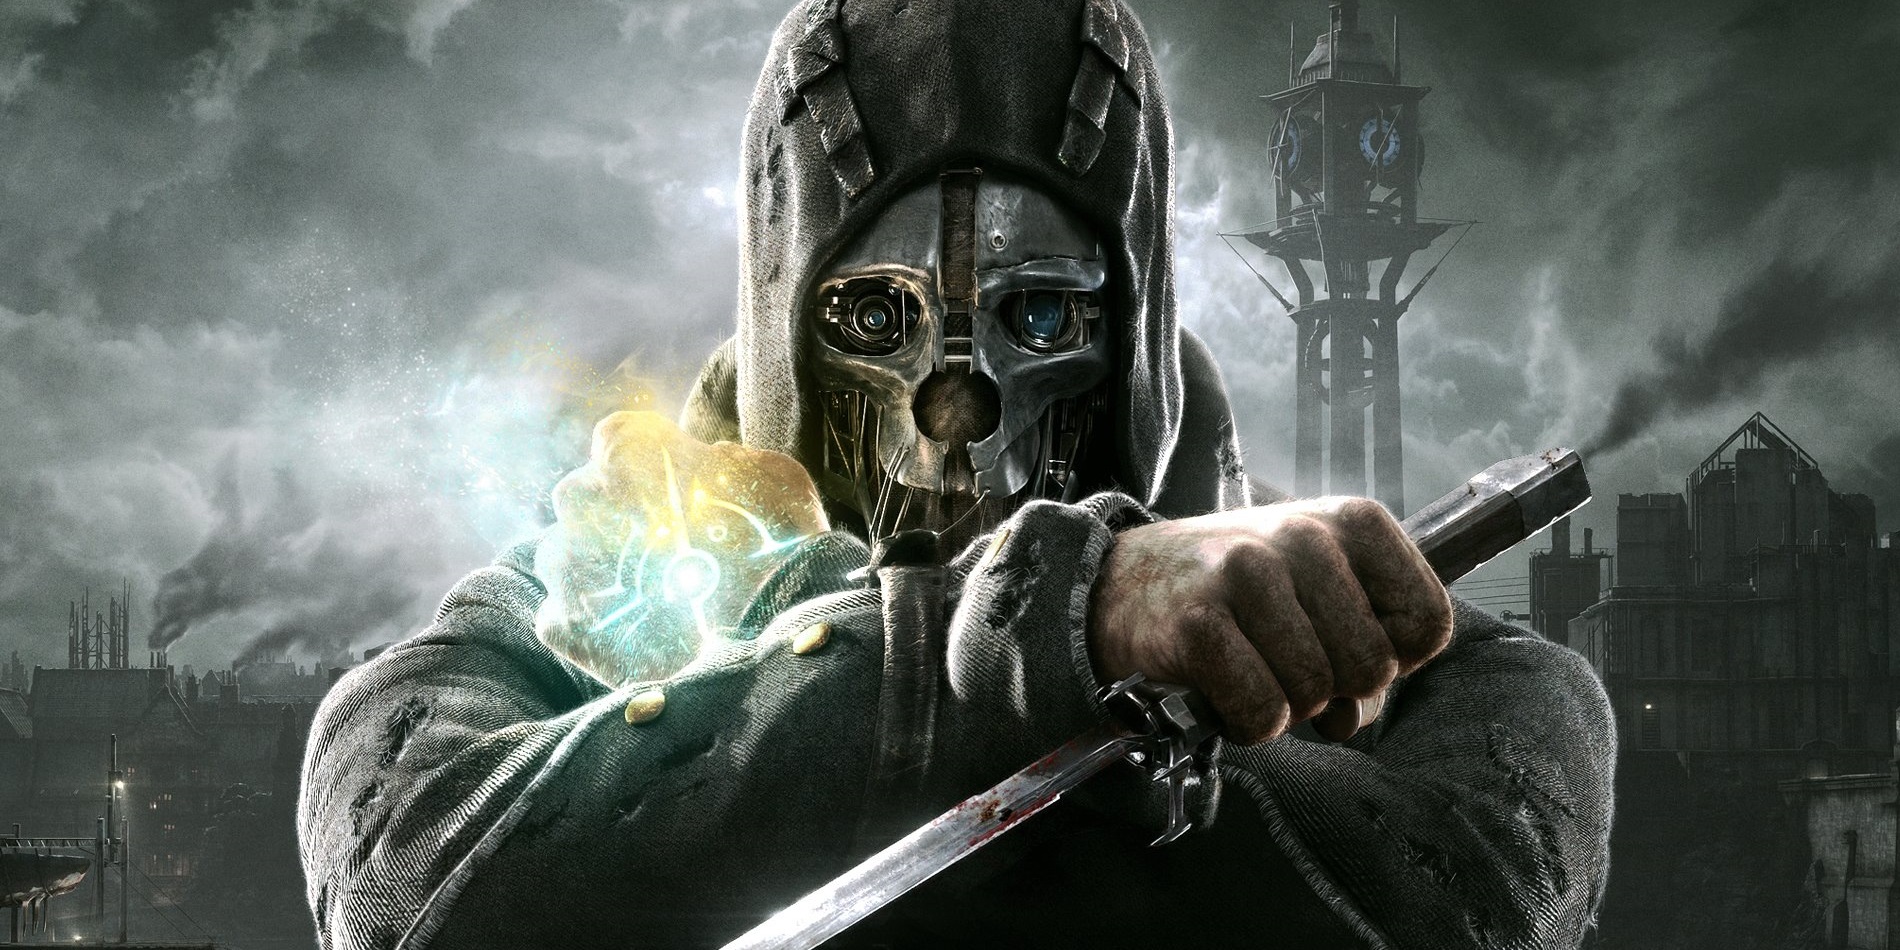 A promotional art piece for Dishonored.